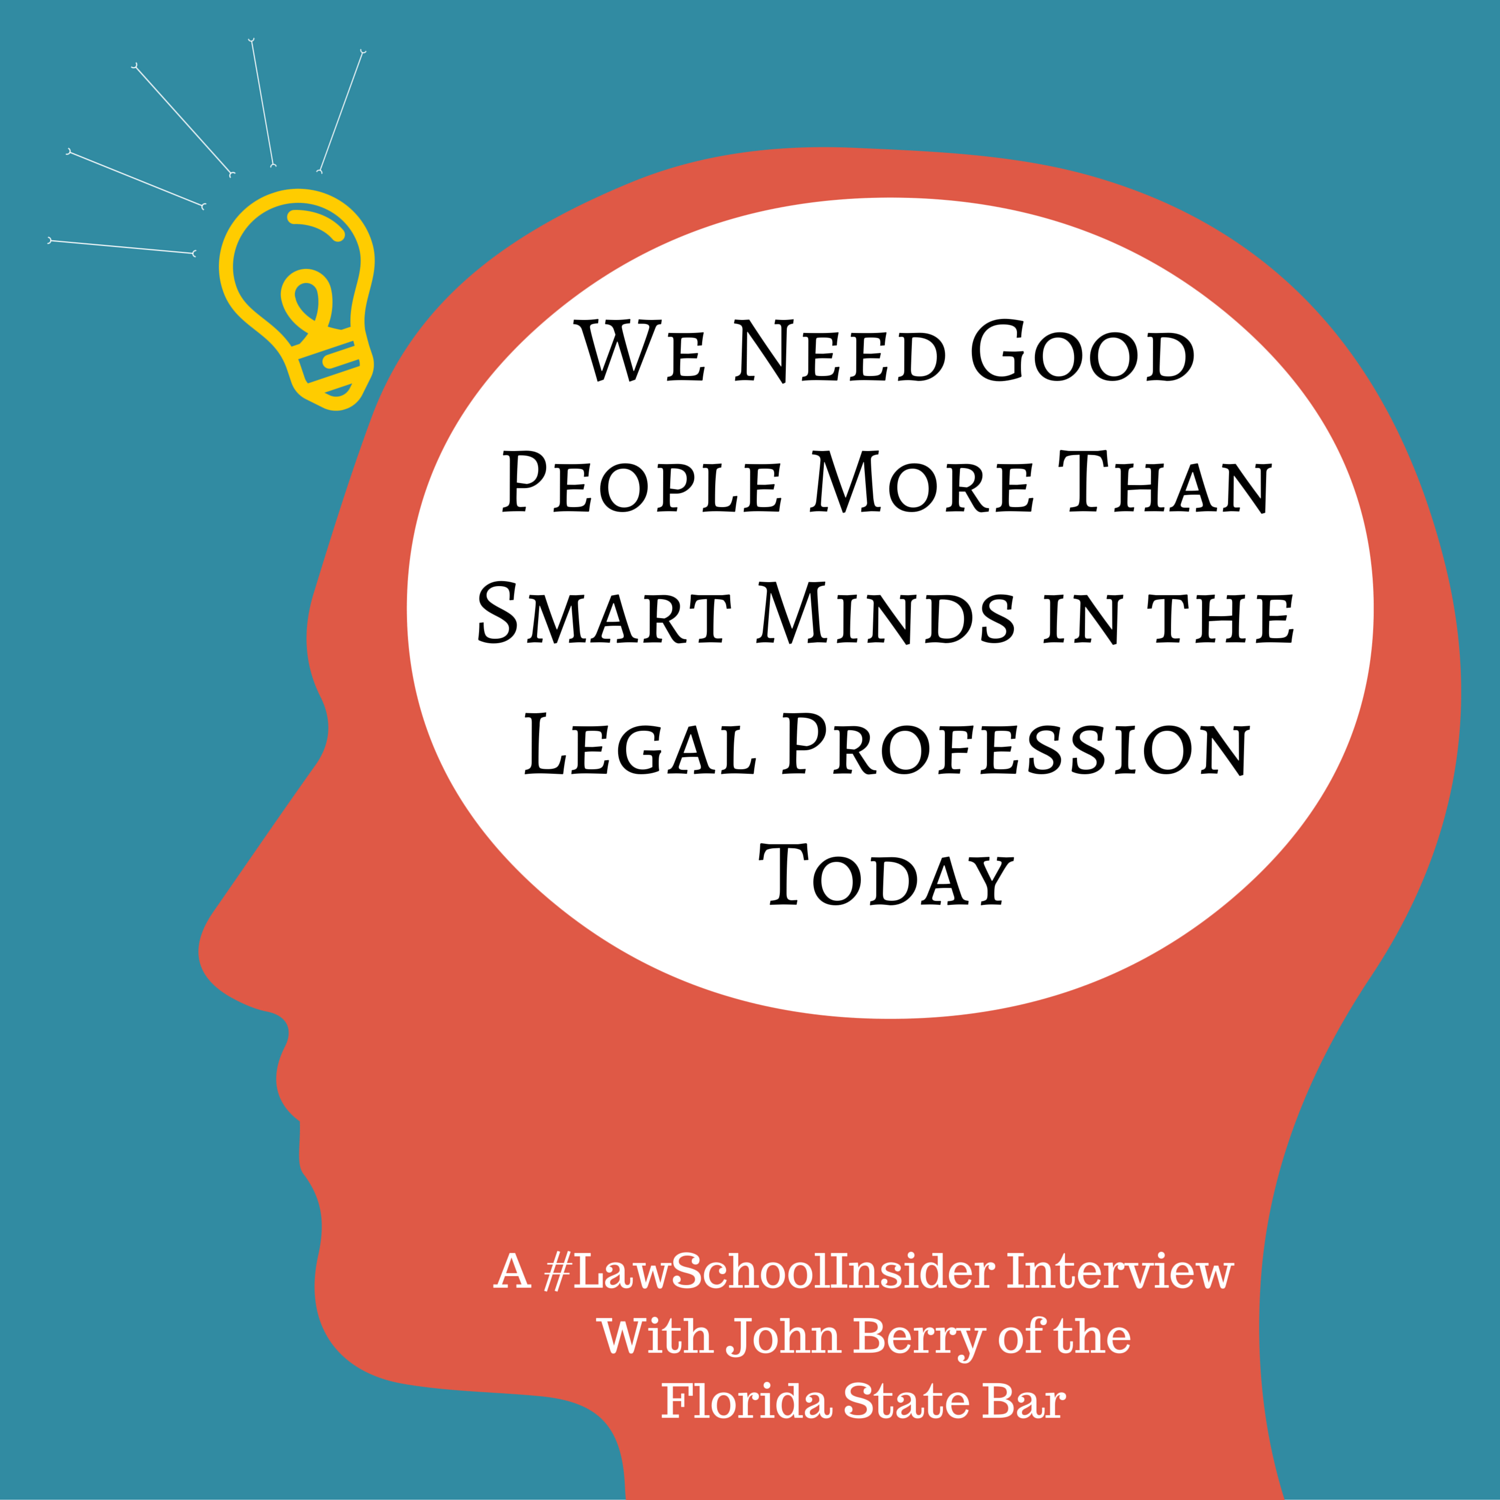 We_Need_Good_People_More_Than_Smart_Minds_in_the_Legal_Profession_Today_1.png